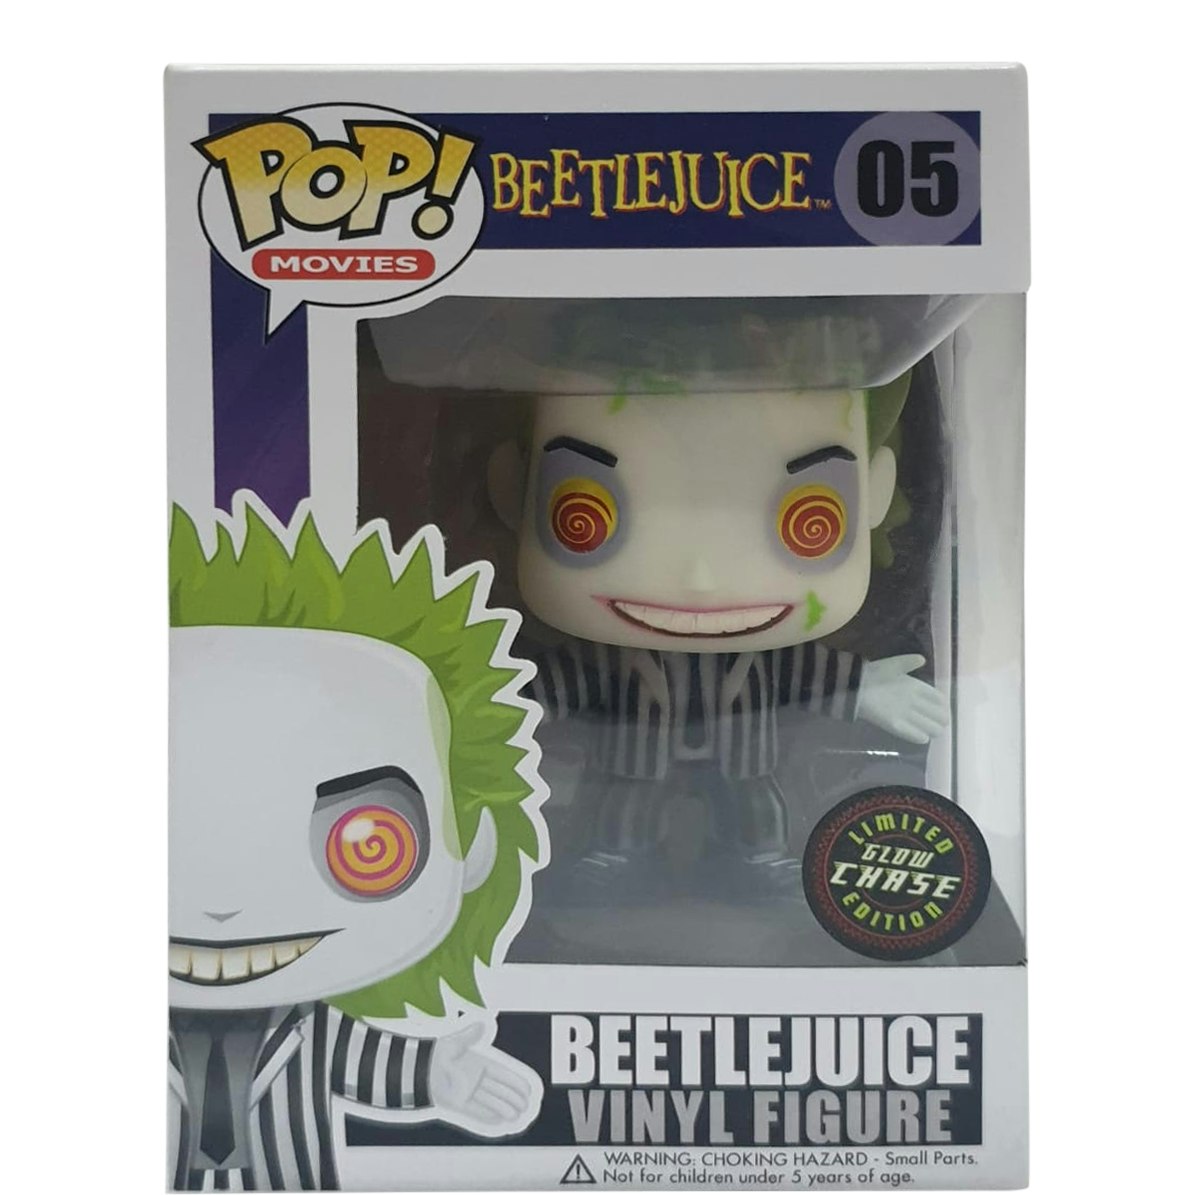 Beetlejuice Movie #05 LIMITED CHASE EDITION Glow in the dark ！ Funko Pop